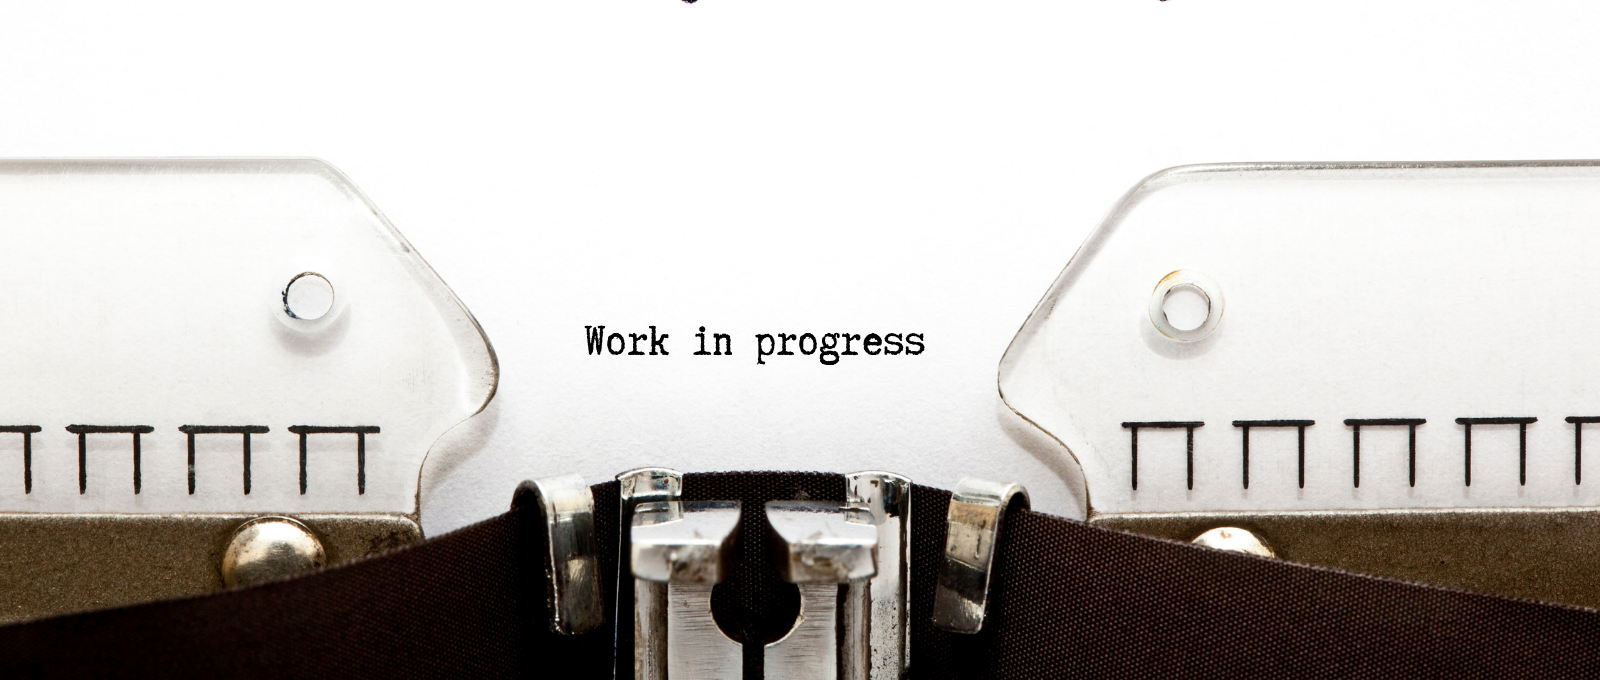 page coming out of typewriter that says Work In Progress